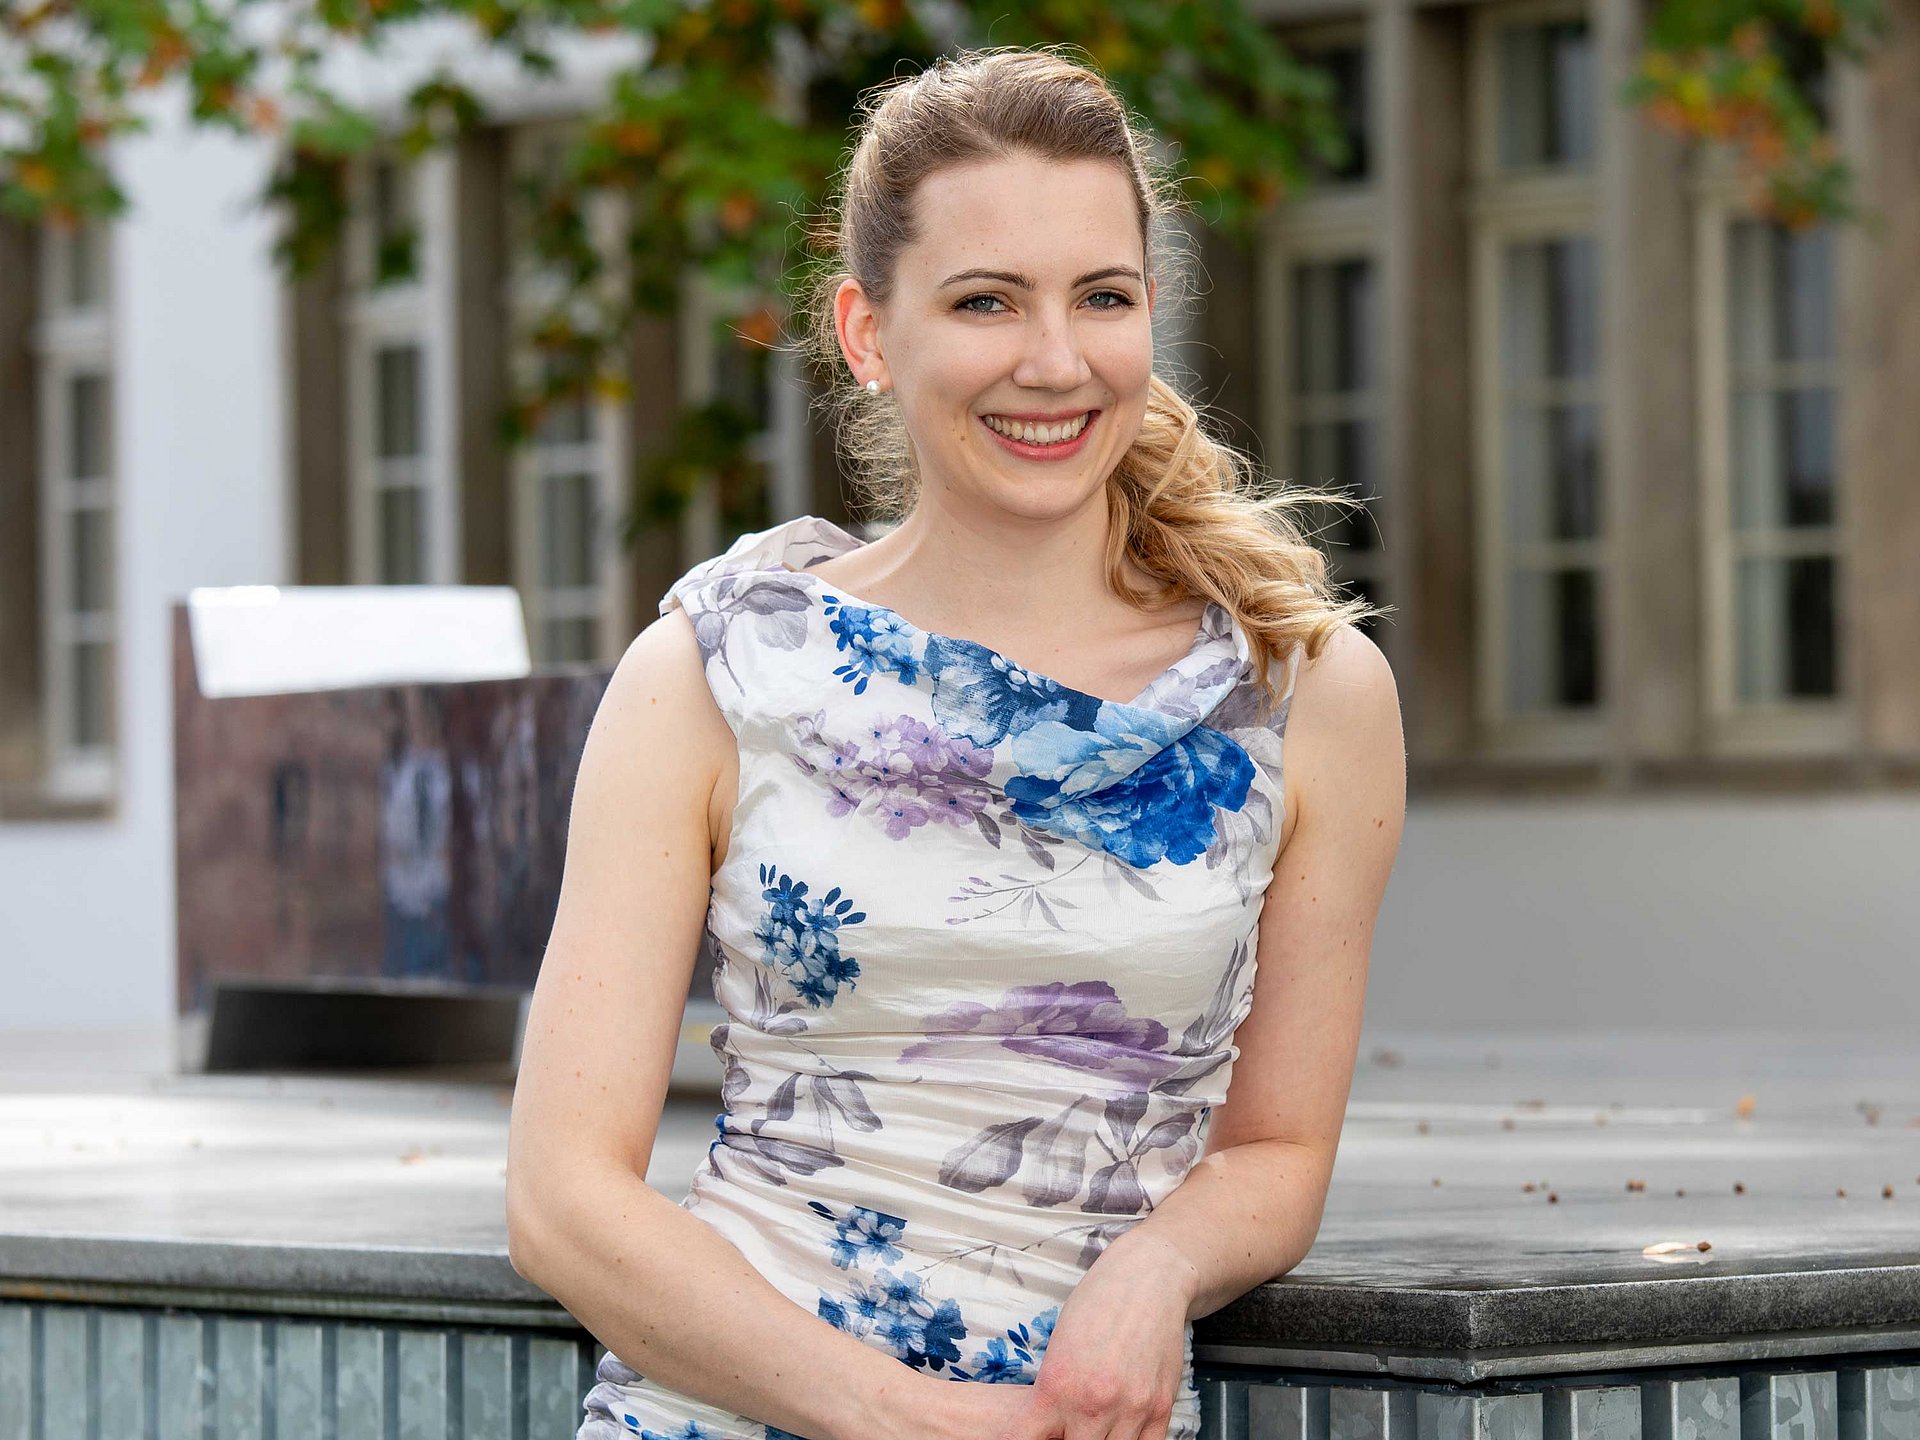 Dr. Katharina Schaar has been awarded the KlarText Prize for Science Communication in the Mathematics category. (Image: Nikola Neven Haubner / Klaus Tschira Foundation)